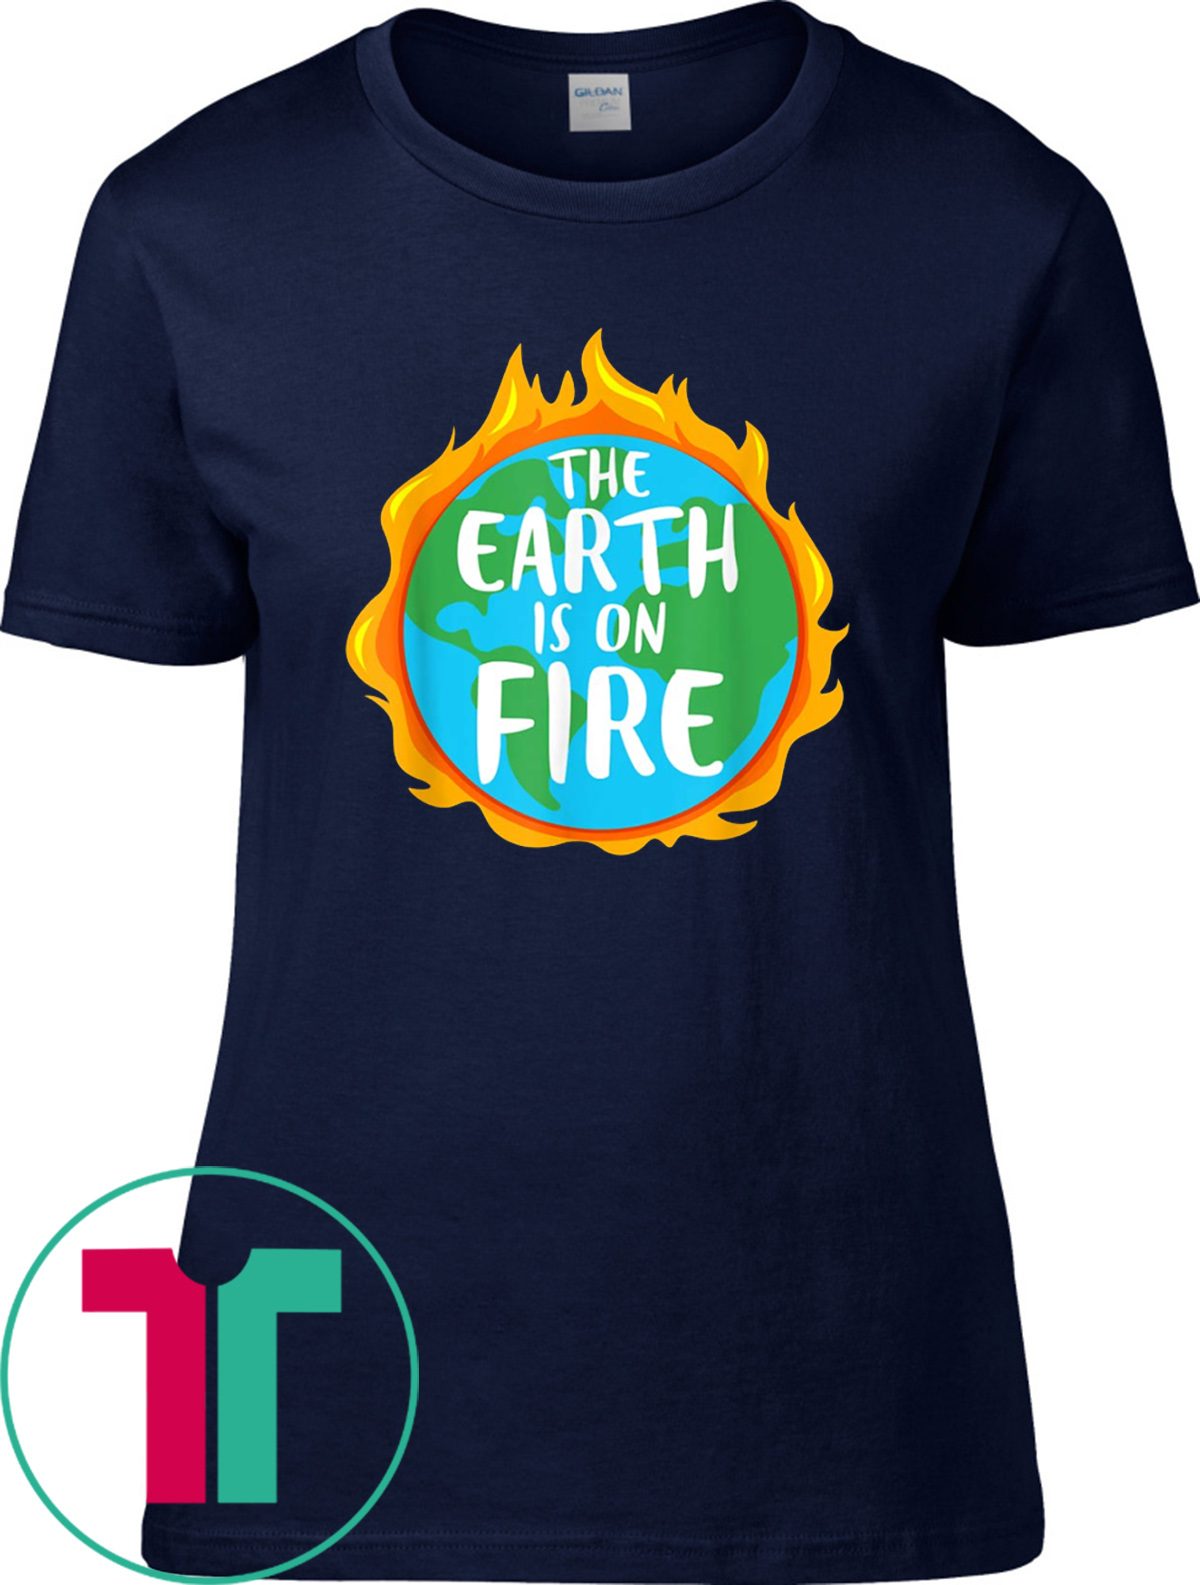 The Earth is on Fire Science T-Shirt